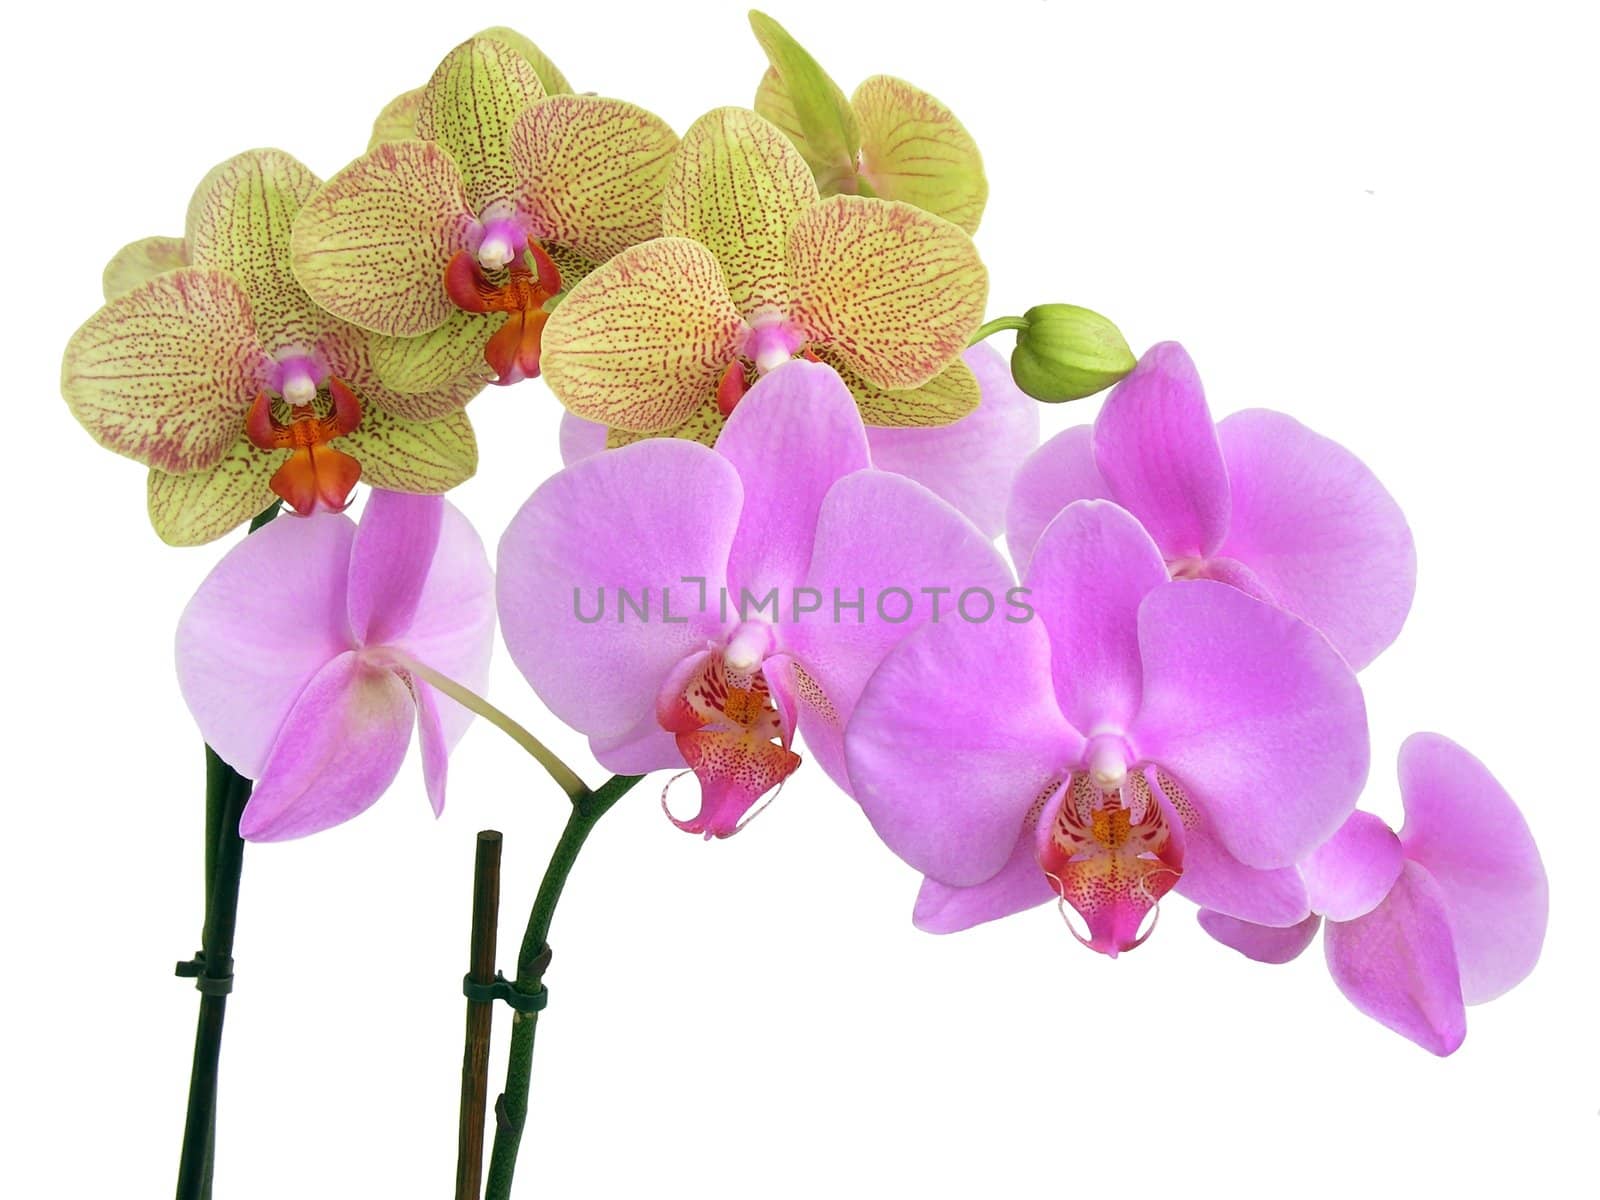 orchids the most beautiful flowers